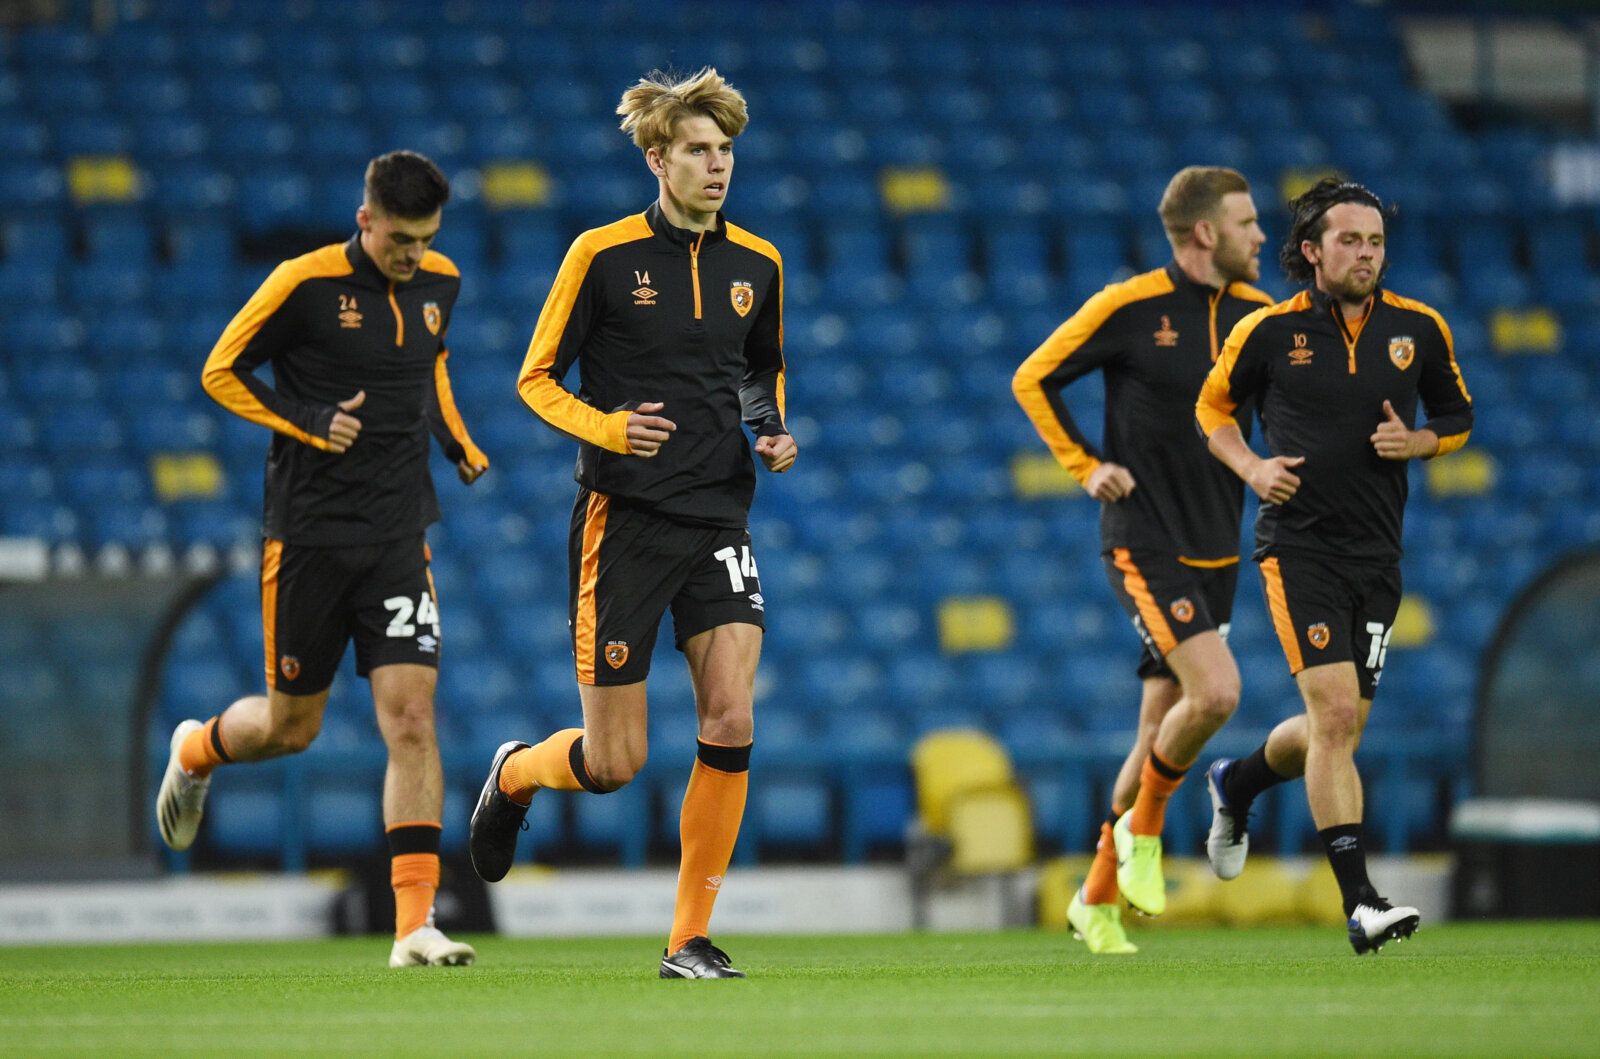 Soccer Football - Carabao Cup Second Round - Leeds United v Hull City - Elland Road, Leeds, Britain - September 16, 2020 Hull City's Martin Samuelsen with George Honeyman and teammates during the warm up before the match Pool via REUTERS/Oli Scarff EDITORIAL USE ONLY. No use with unauthorized audio, video, data, fixture lists, club/league logos or 'live' services. Online in-match use limited to 75 images, no video emulation. No use in betting, games or single club/league/player publications.  Pl